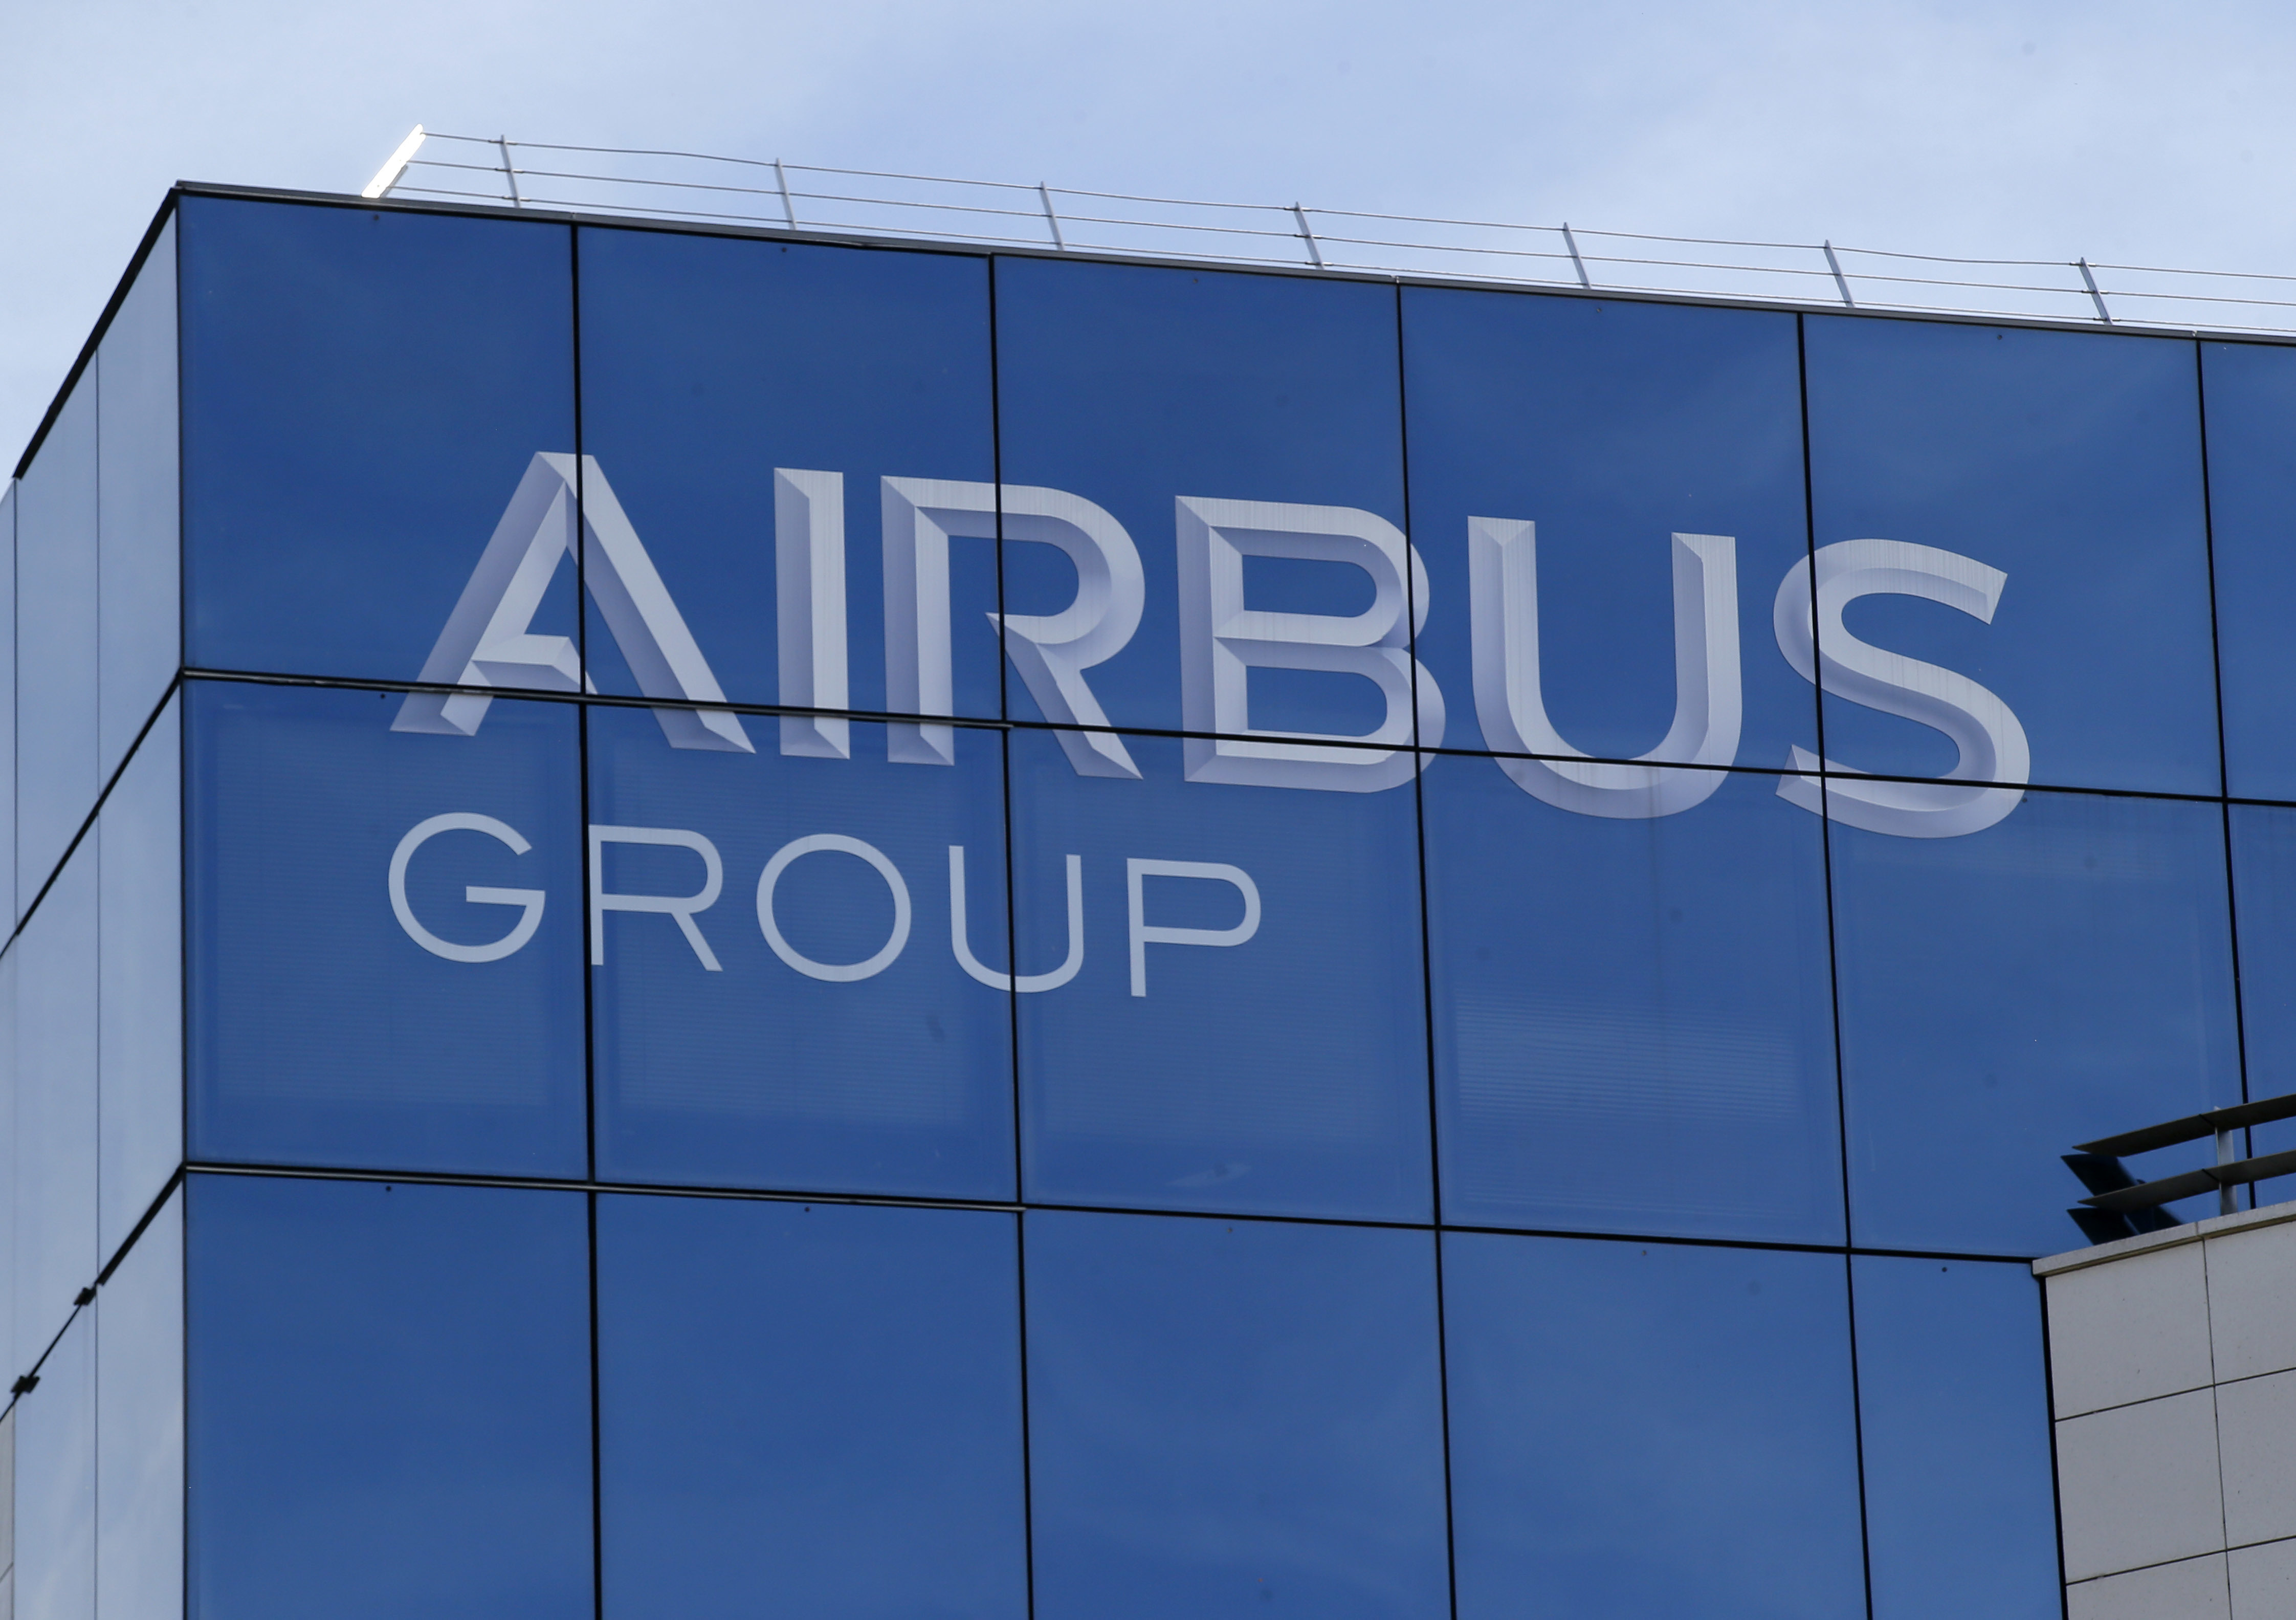 The Airbus Group logo